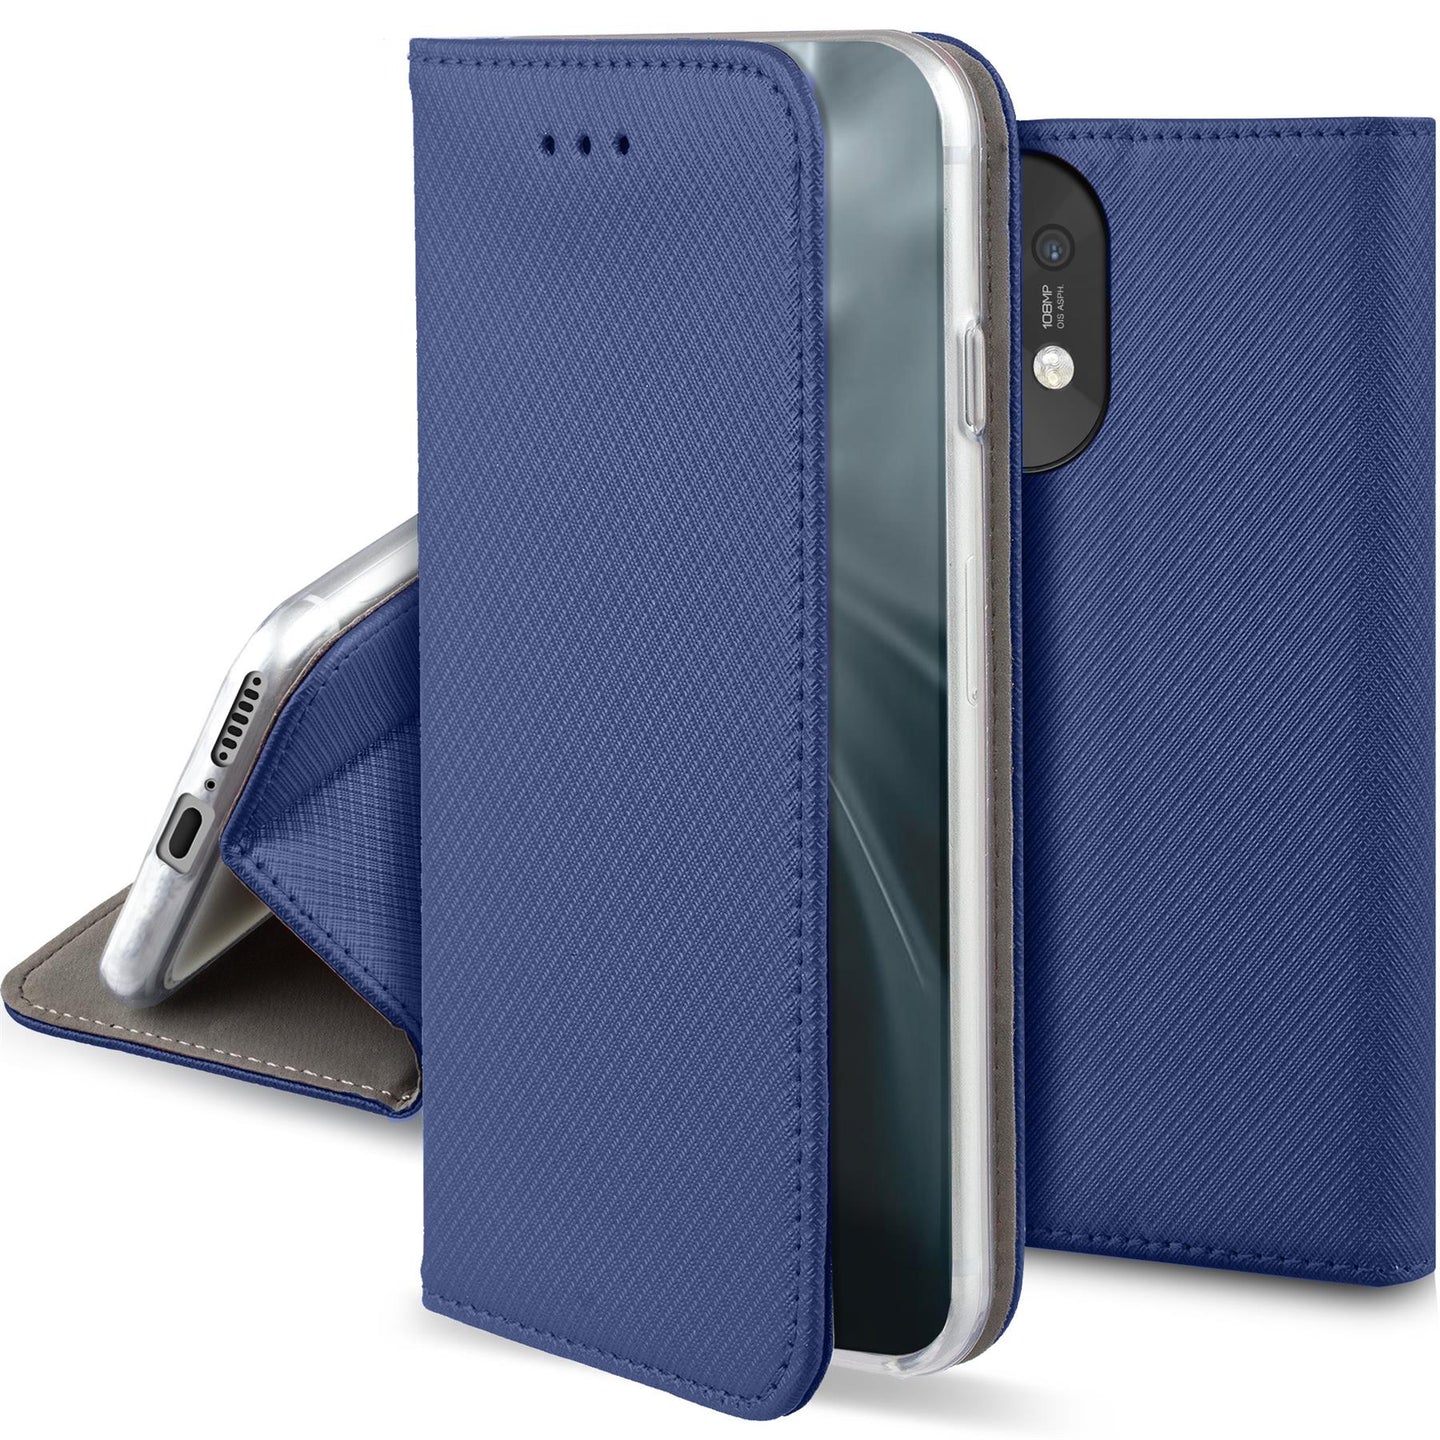 Moozy Case Flip Cover for Xiaomi Mi 11, Dark Blue - Smart Magnetic Flip Case Flip Folio Wallet Case with Card Holder and Stand, Credit Card Slots